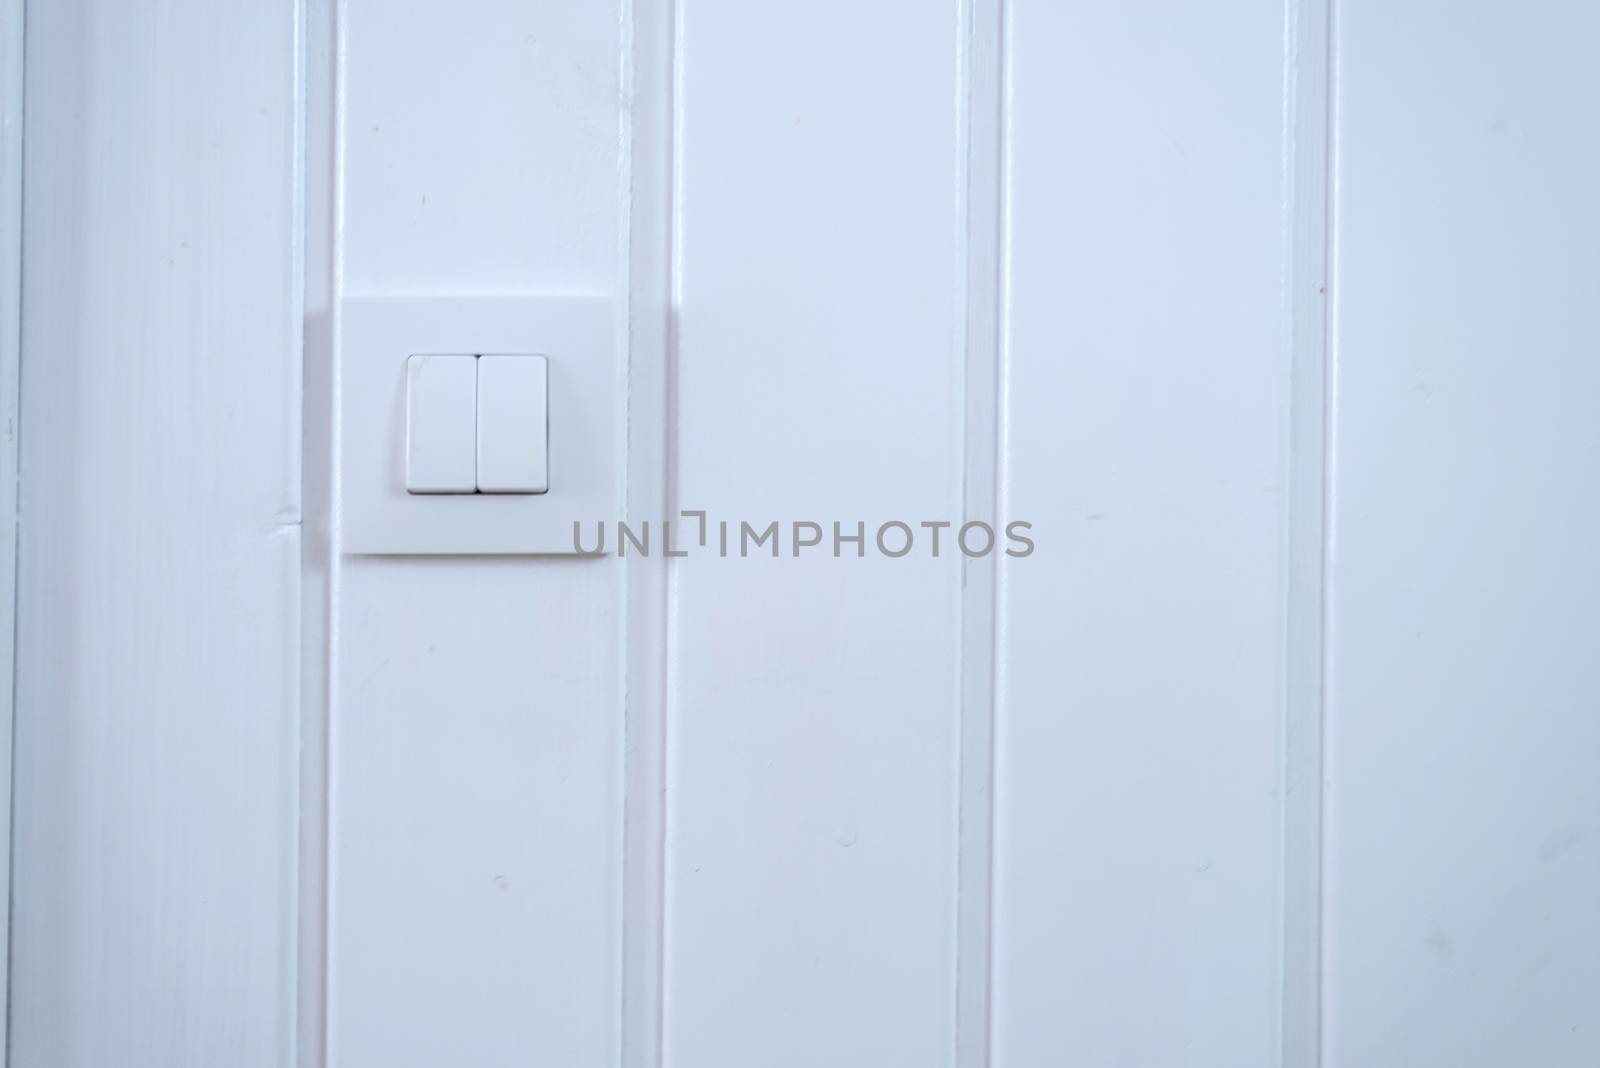 Light switch Two Switches On over a white wall by raferto1973